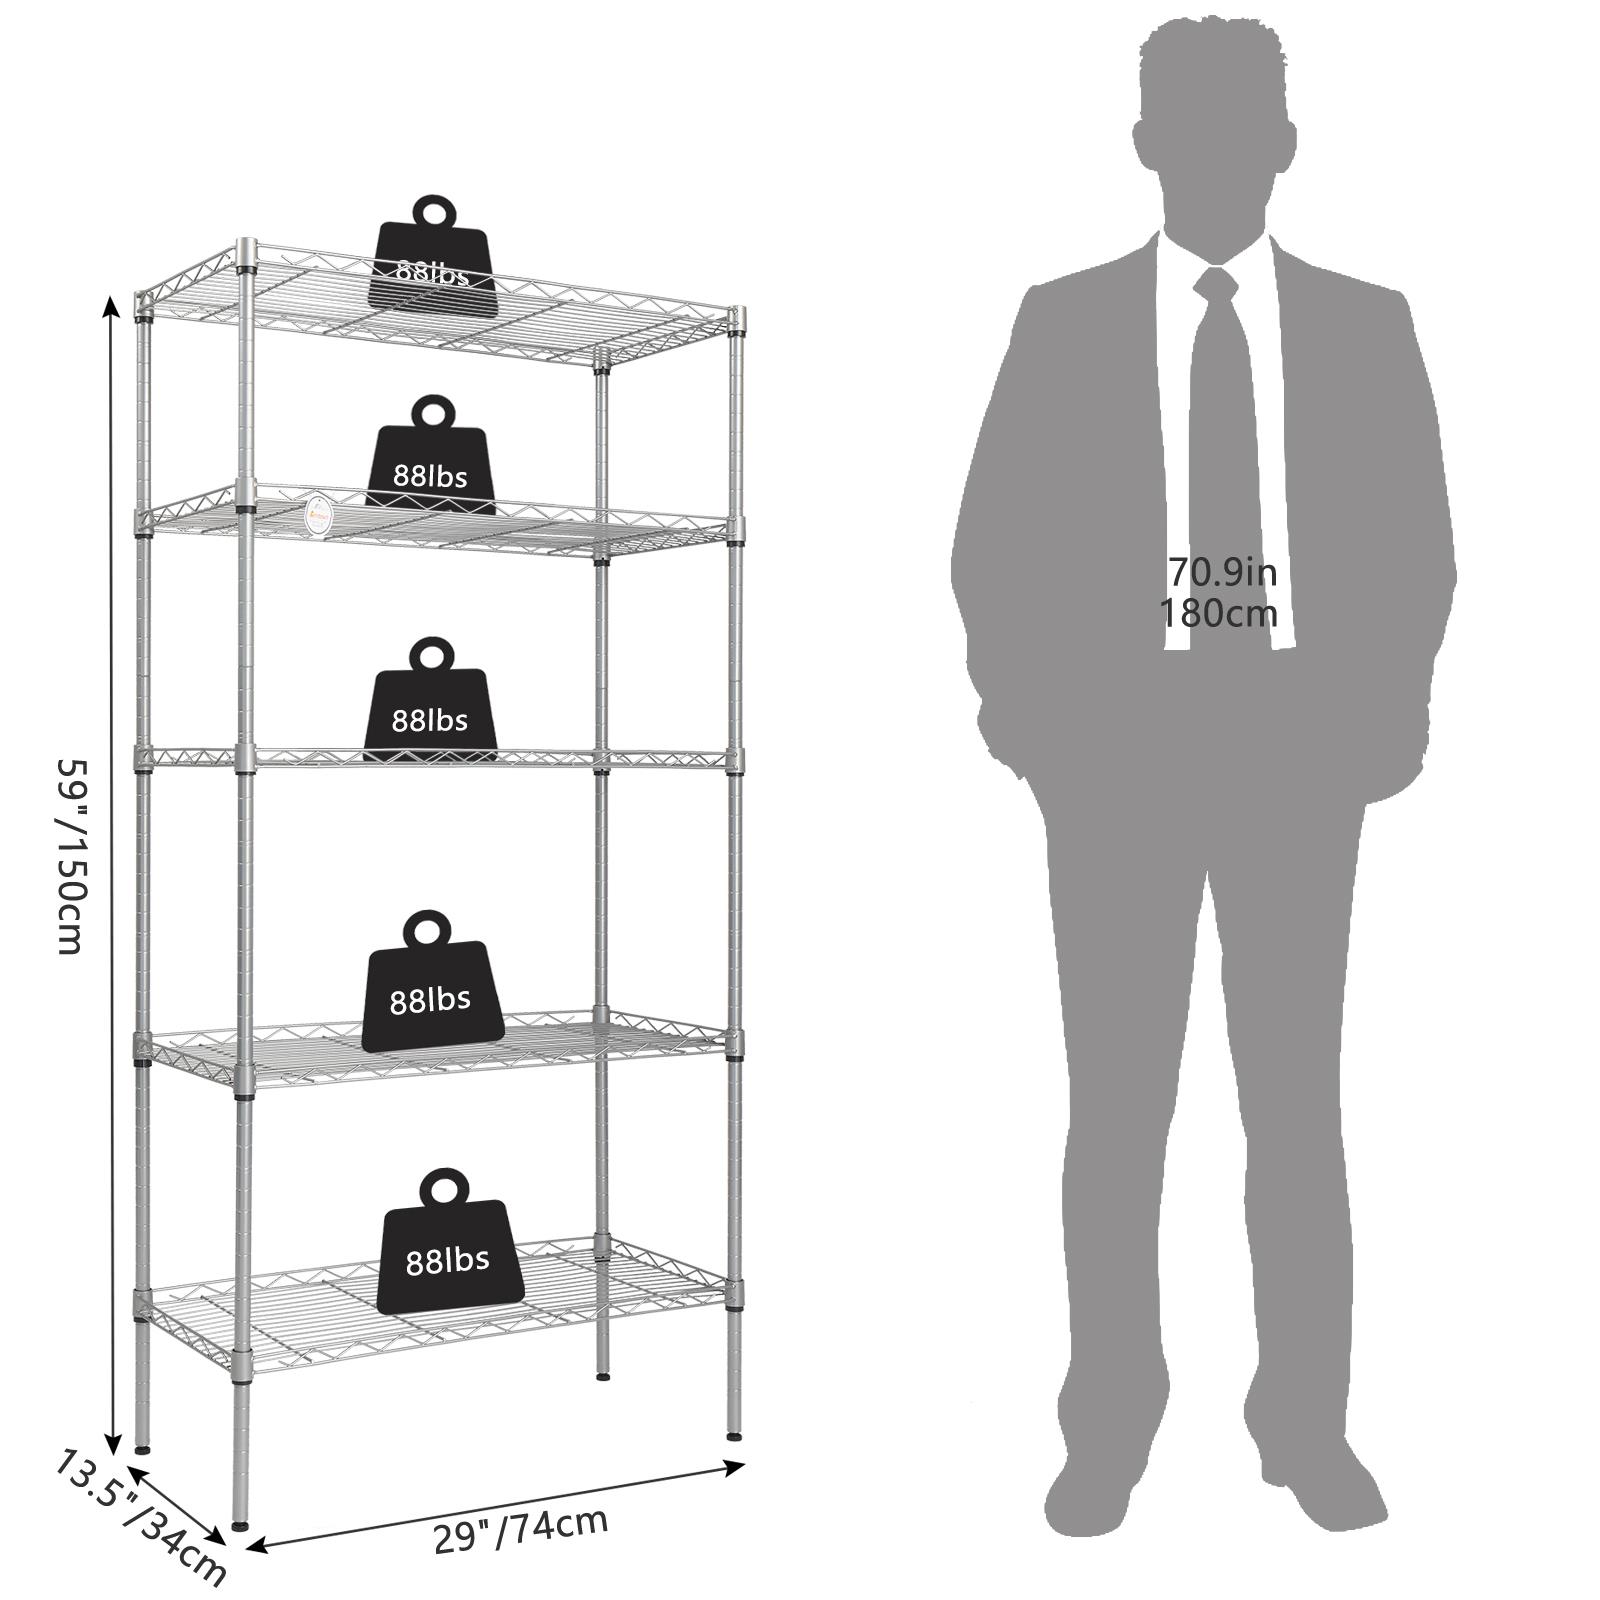 Ktaxon 5-Tier Wire Shelving Unit, Steel Storage Rack for Office Kitchen 30" W x 14" D x 60" H, Silver - image 5 of 9